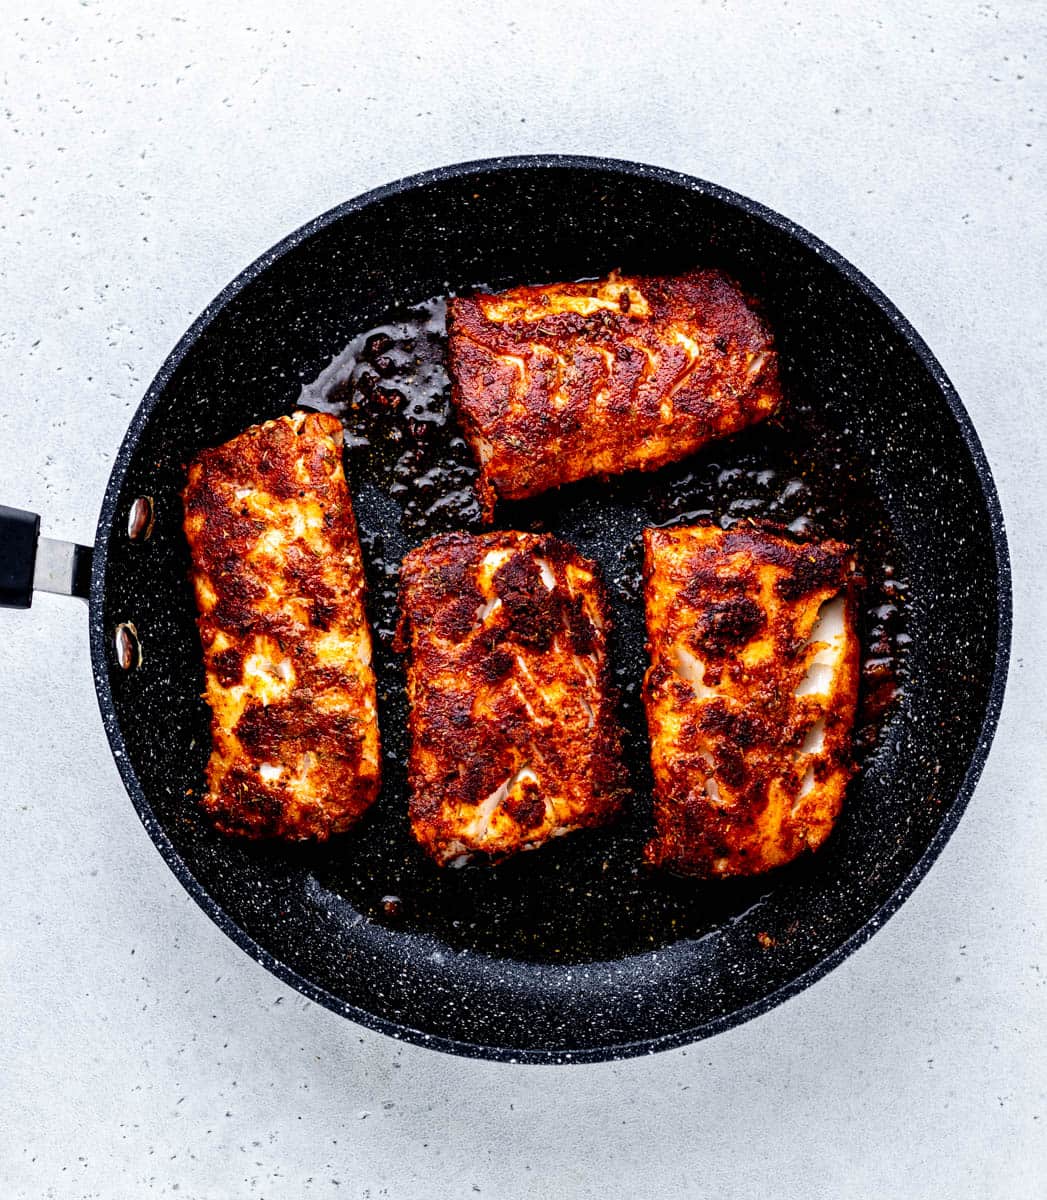 Cooking the cod in a cast iron skillet.